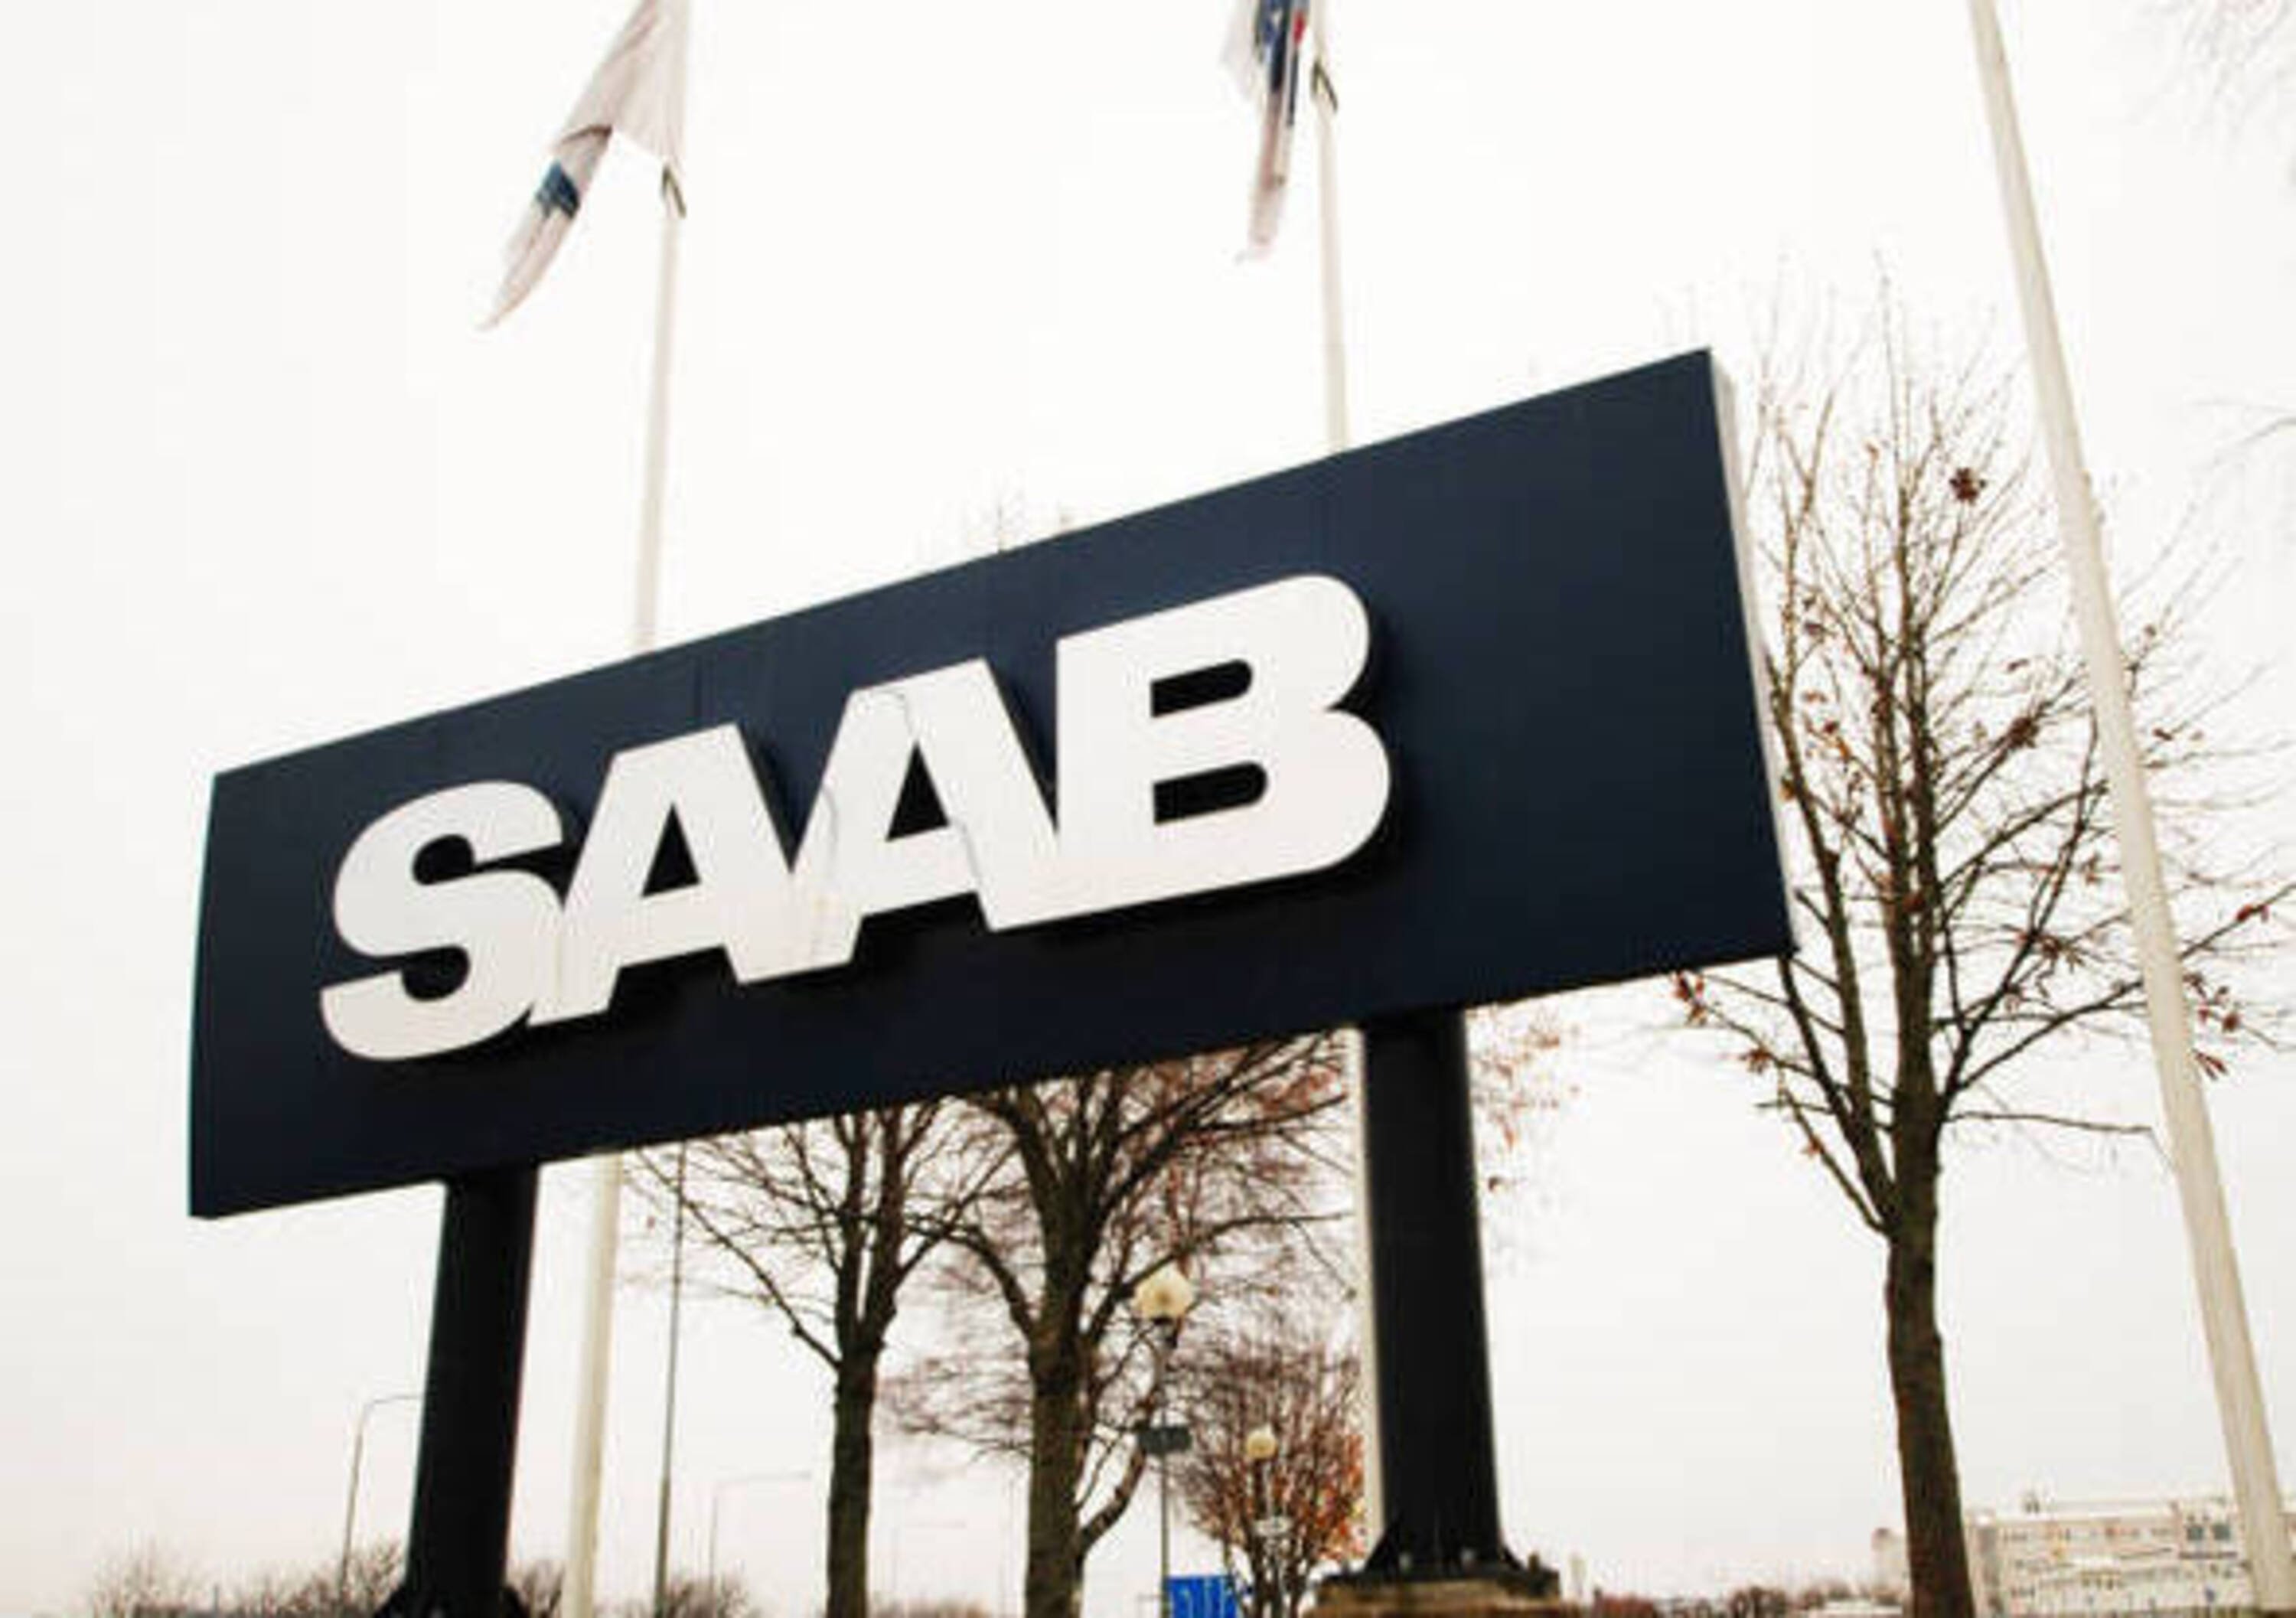 Saab Parts acquisisce societ&agrave; in Europa